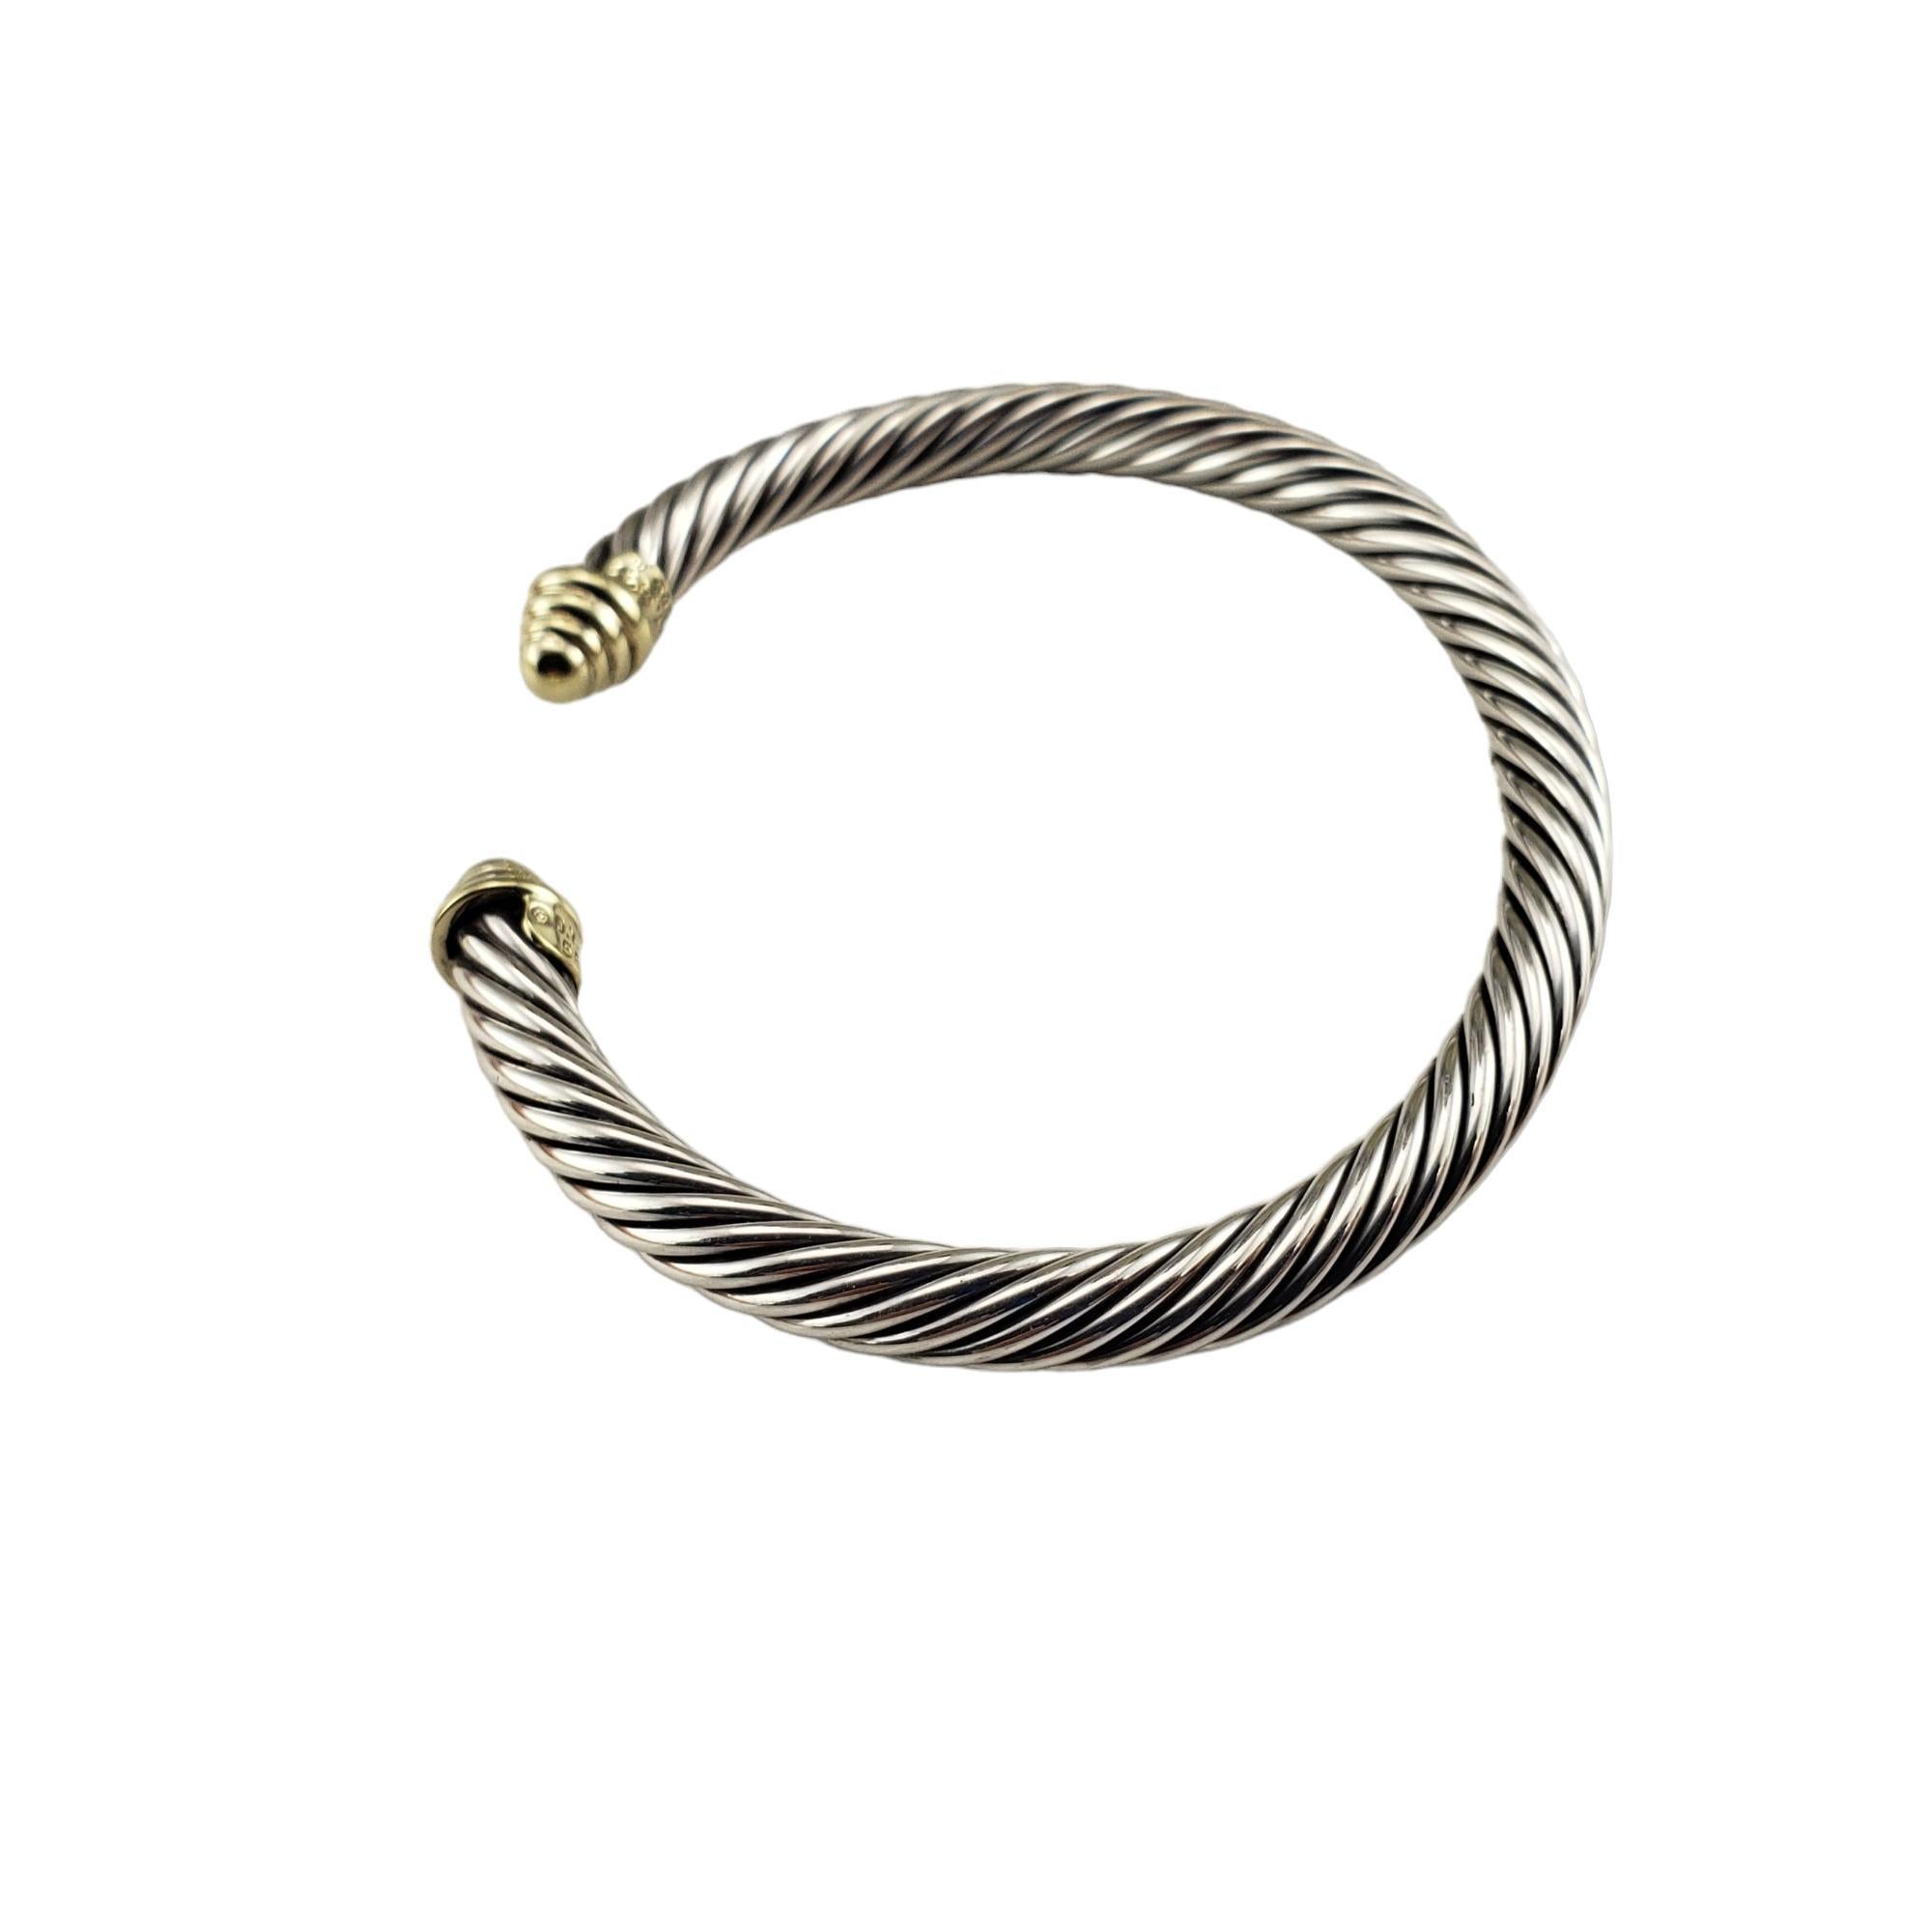 David Yurman Sterling Silver and 14K Yellow Gold Cable Cuff Bracelet-

This elegant cable bracelet by David Yurman is crafted in beautifully detailed sterling silver and 14K yellow gold.  Width:  5 mm.

Size: 6 inches (gap: 1 inch)

Hallmark:  David